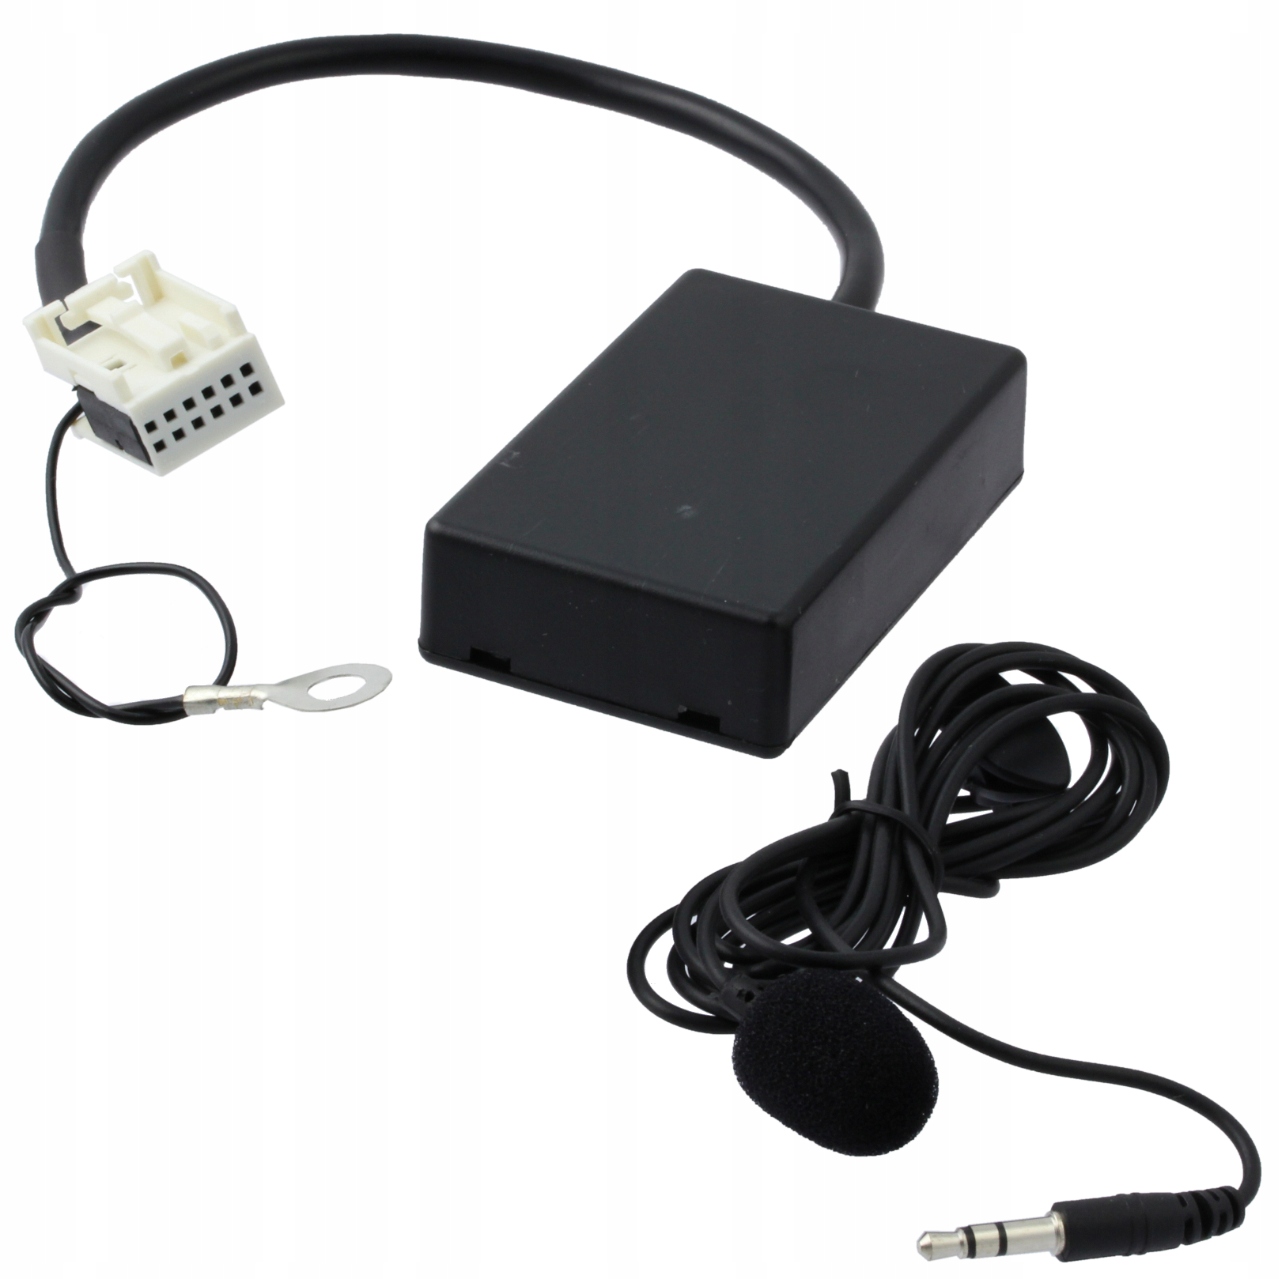 Adaptateur Audio Aux Bluetooth Volkswagen Polo Streaming Rcd 200 Rns 300  Mfd